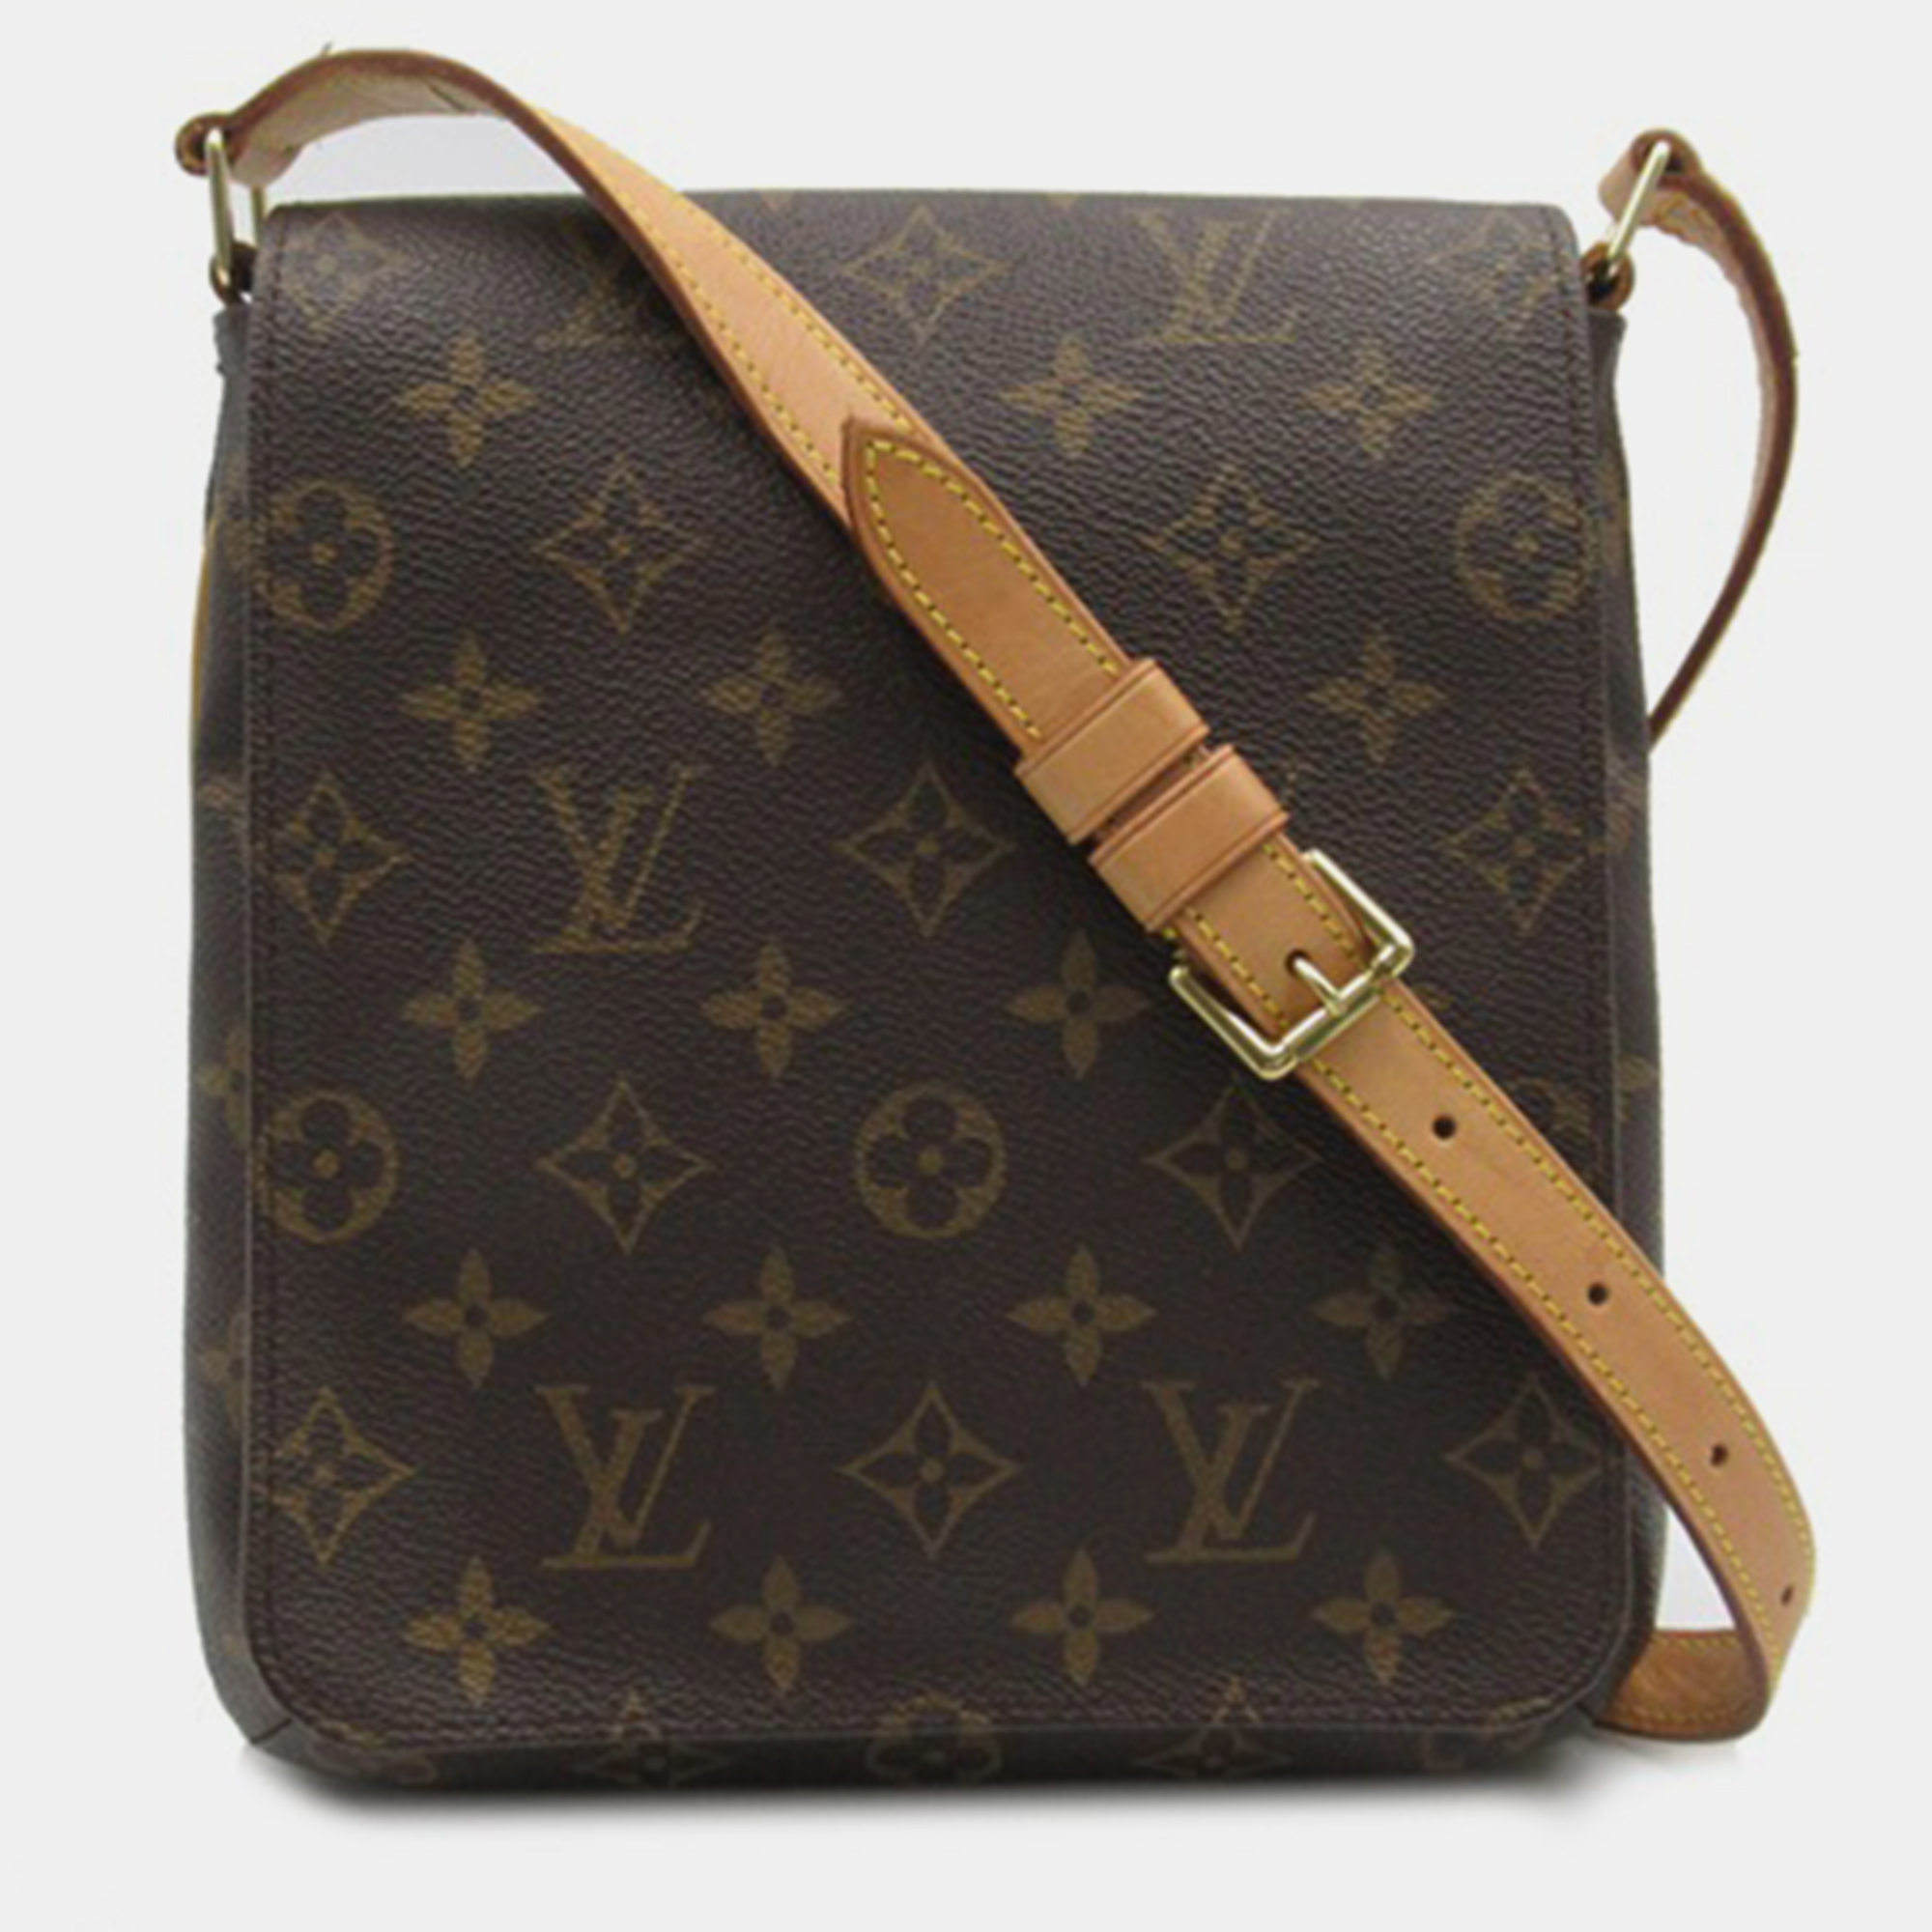 Carry this lovely Louis Vuitton bag as a stylish accompaniment to your ensemble. Made from high quality materials it has a luxe look and durable quality.